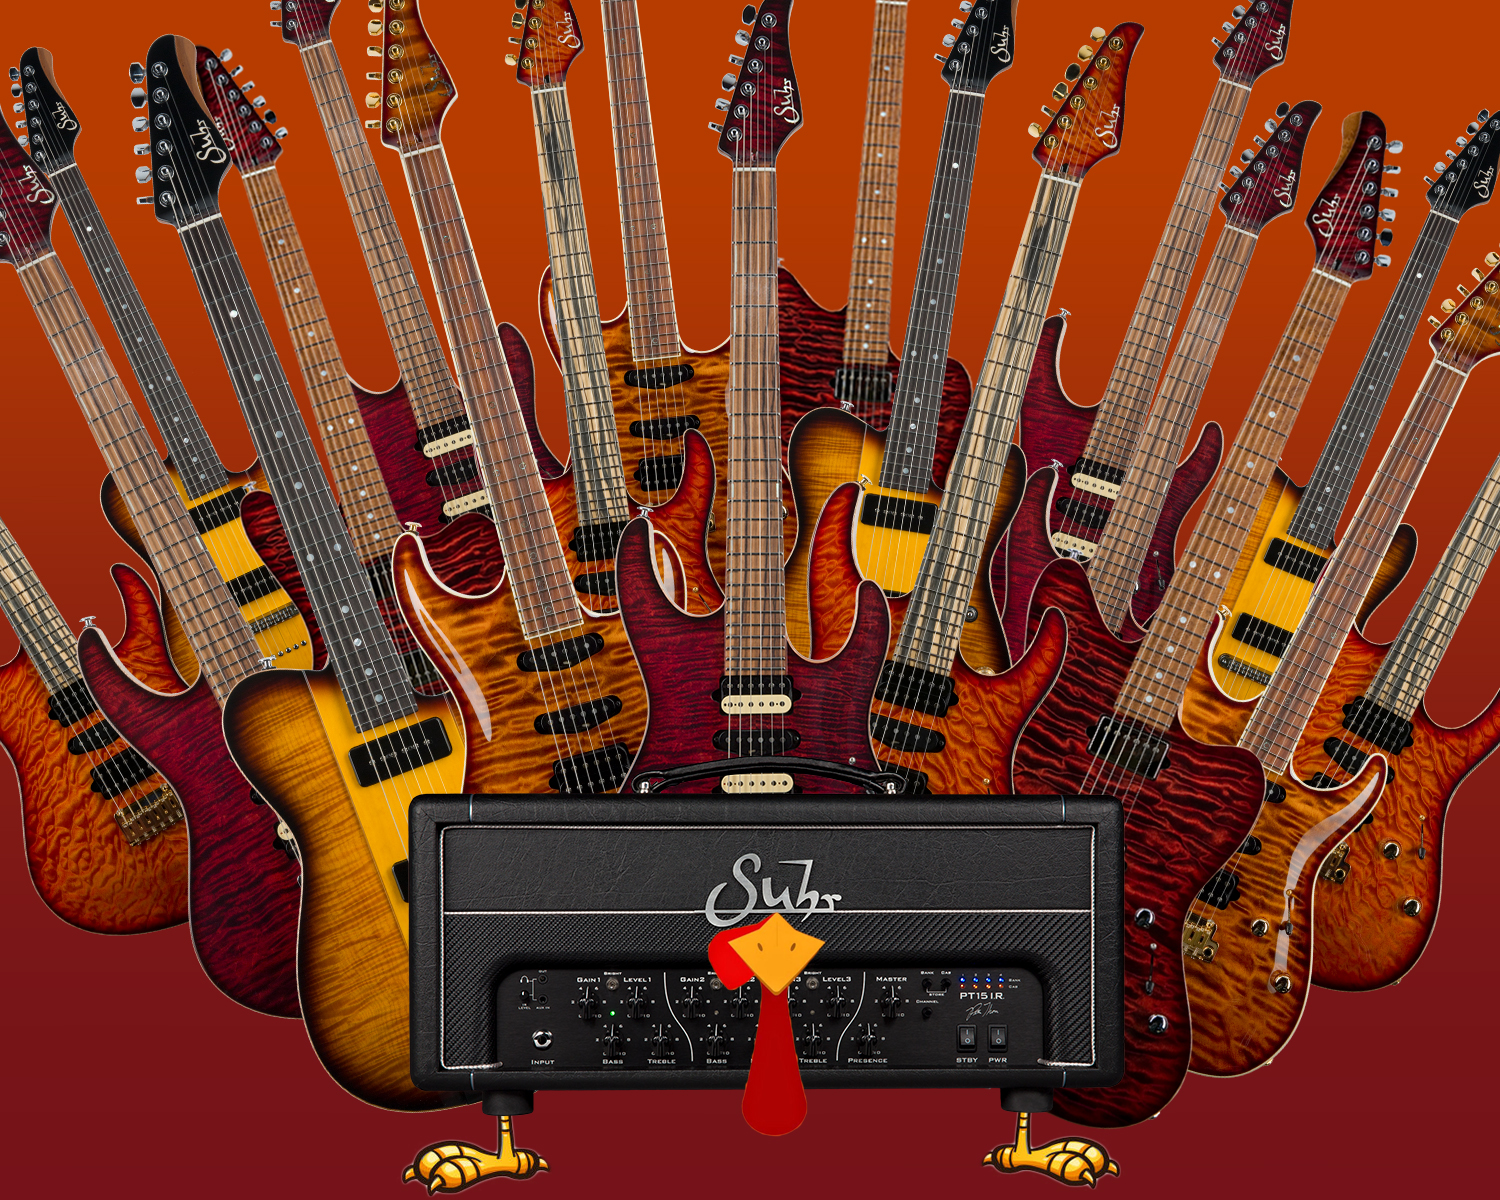 Suhr Guitars wishes a Happy Thanksgiving